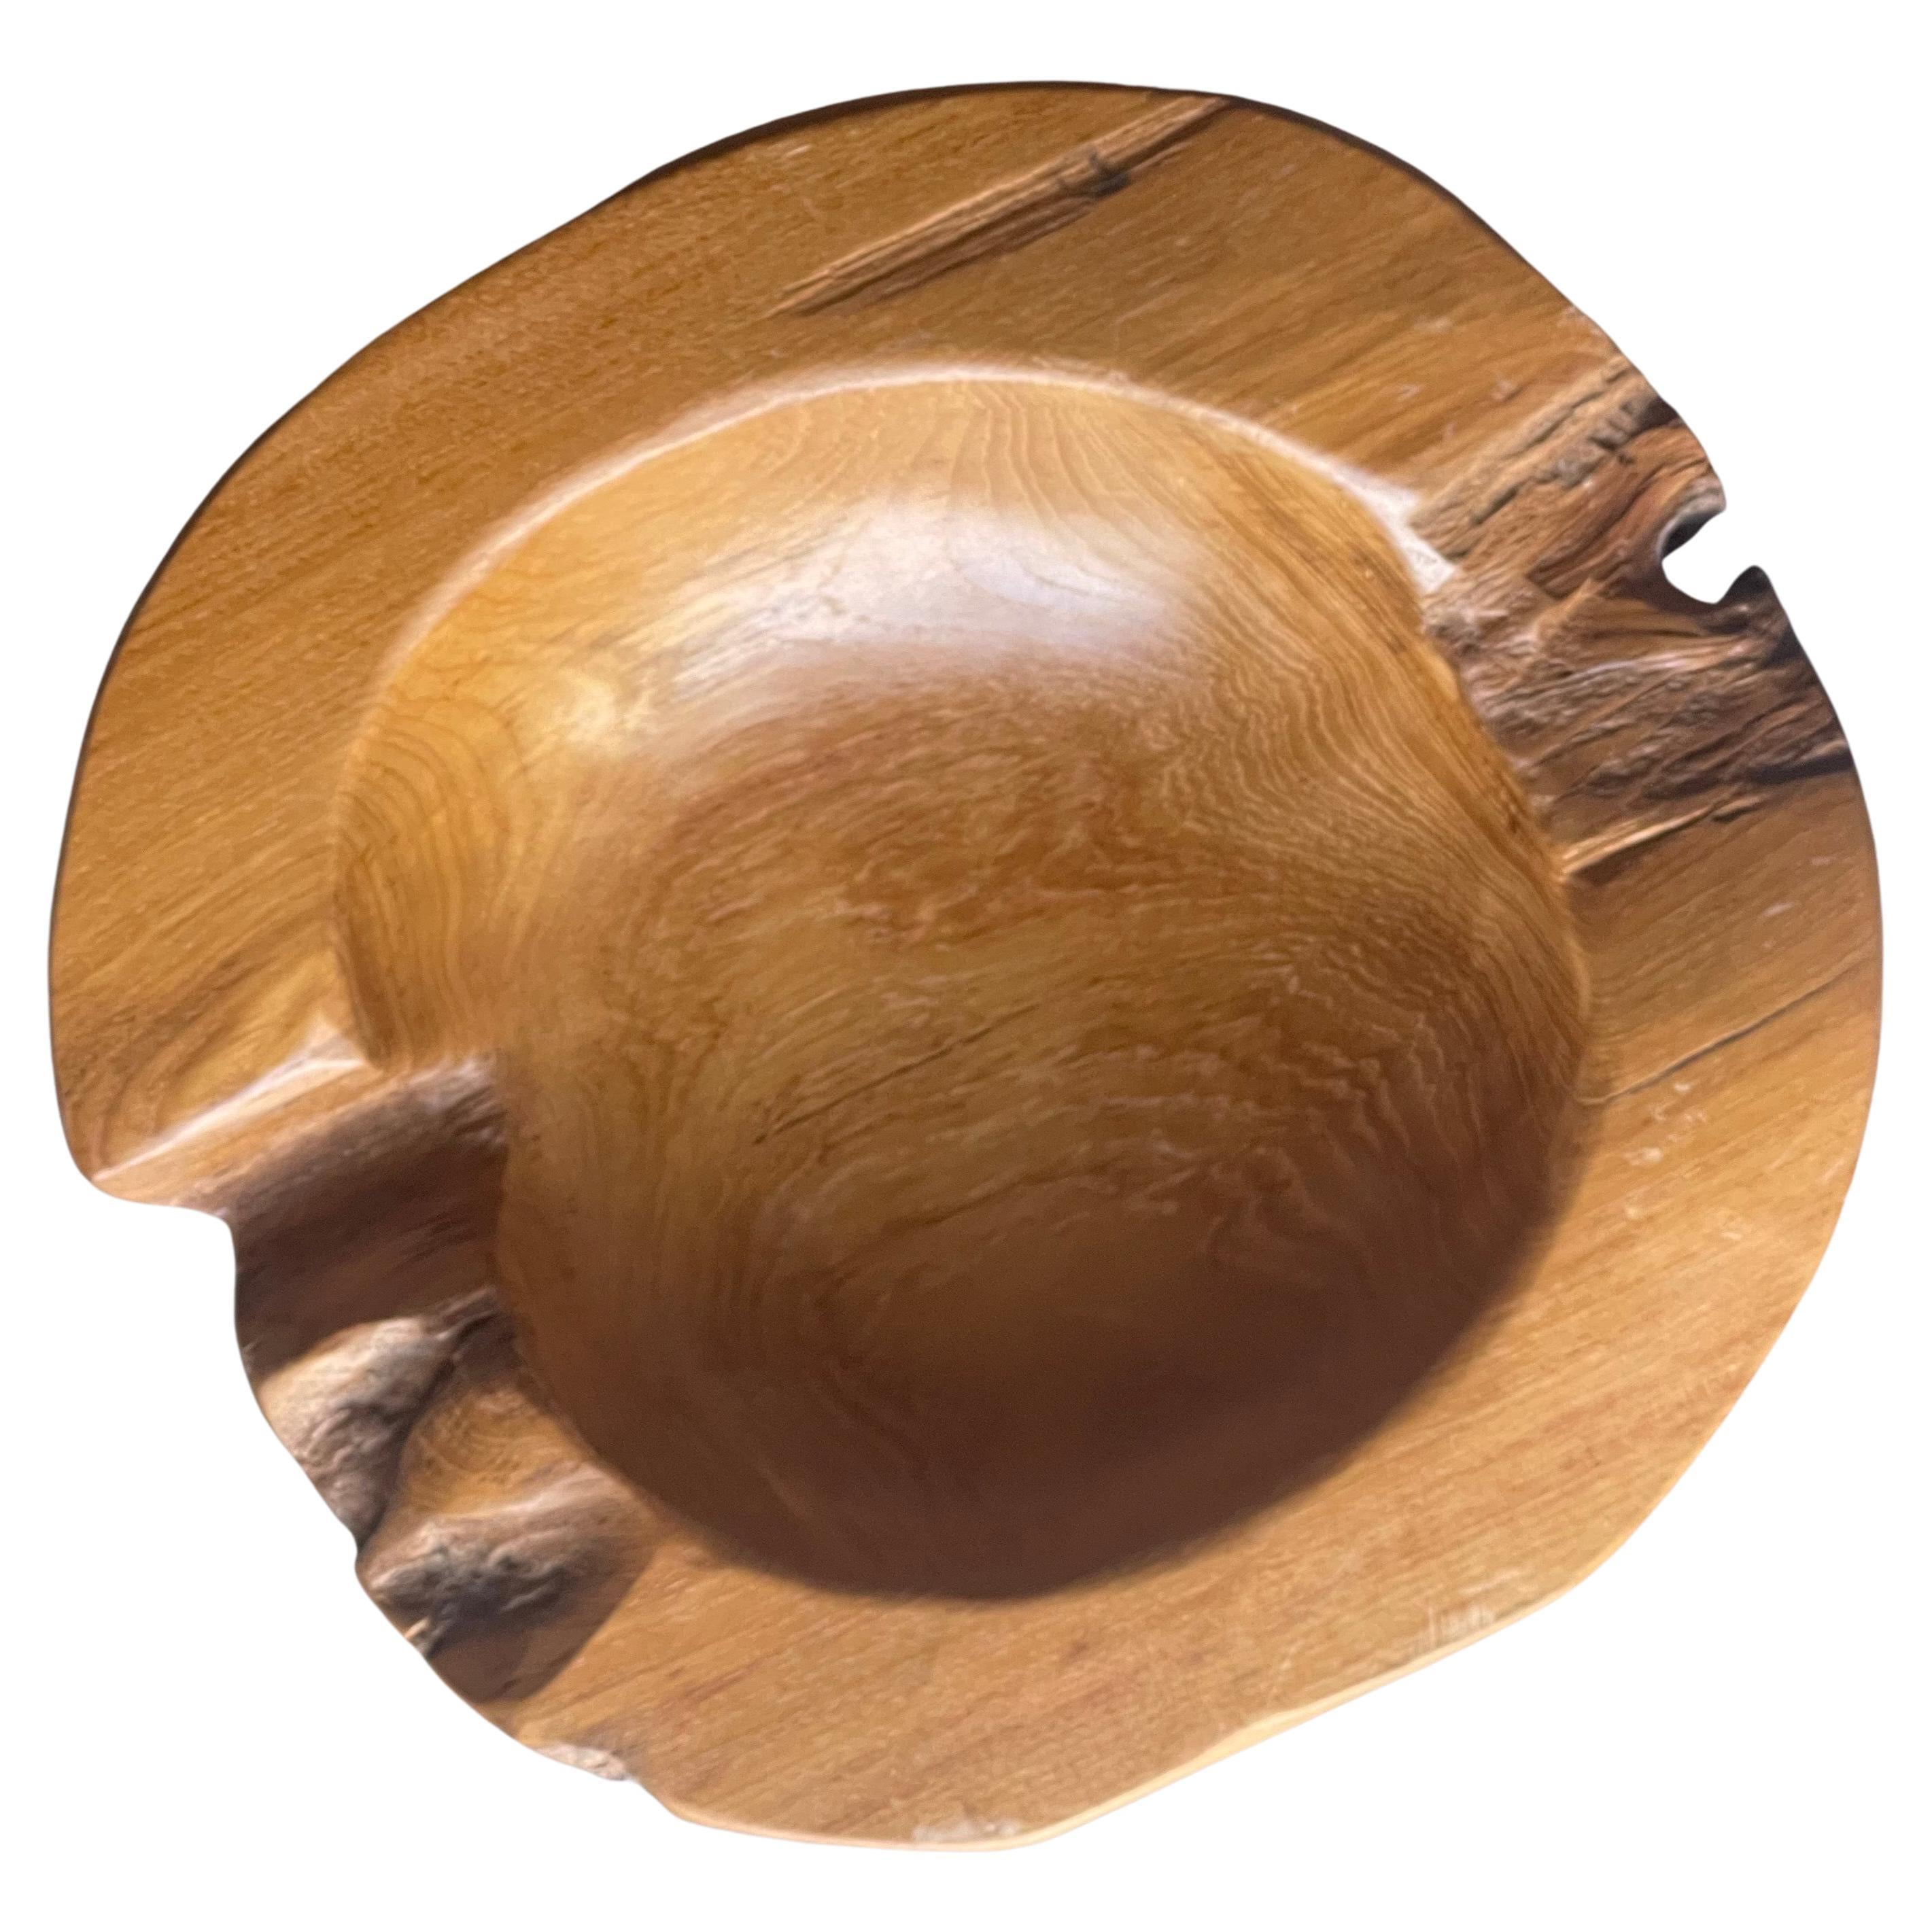 A gorgeous round natural teak freeform bowl, circa 1960s. The bowl has a great organic modern look and measures 11